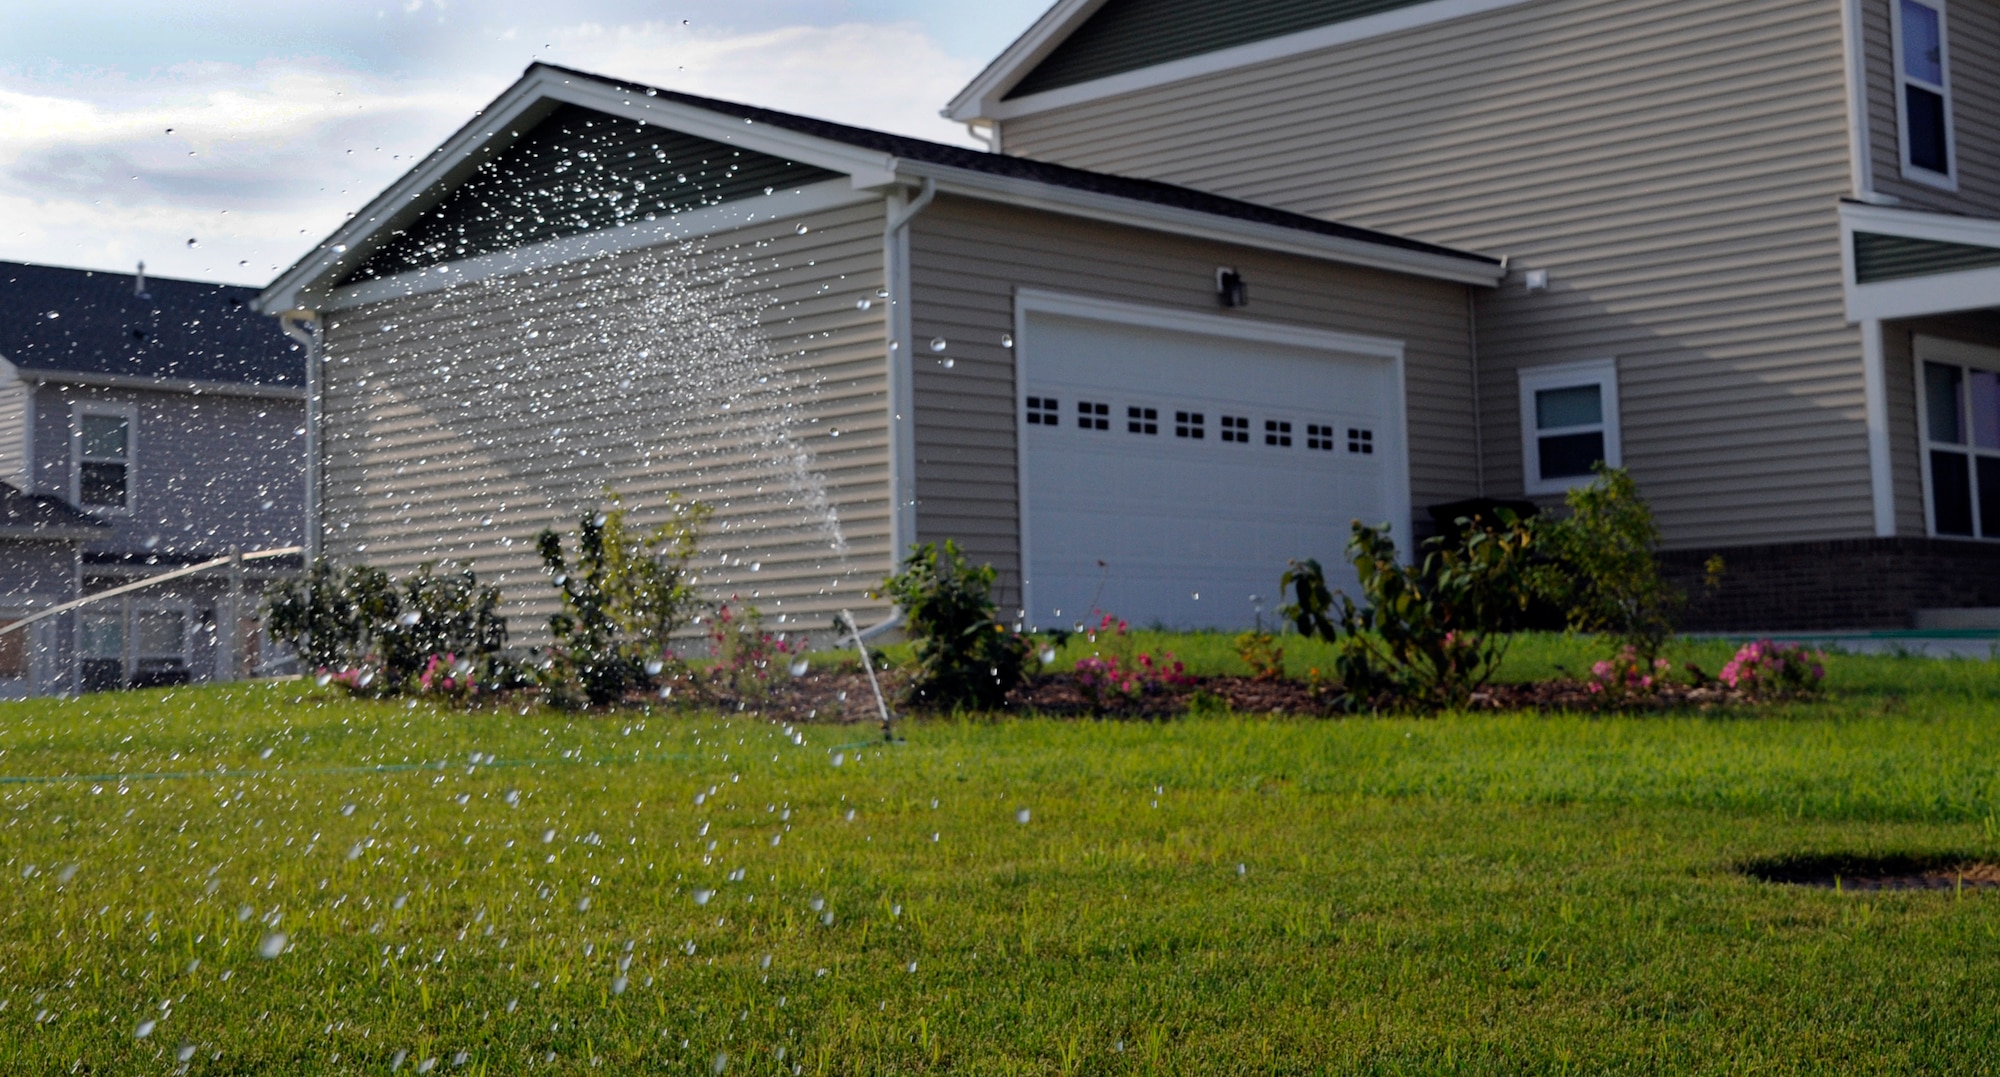 WHITEMAN AIR FORCE BASE, Mo. - A sprinkler waters lawns in base housing here July 28, 2011. The base housing office recommends all occupants to water their lawn up to one inch per week, whether its by rain or applied water. (U.S. Air Force photo by Airman 1st Class Cody H. Ramirez)